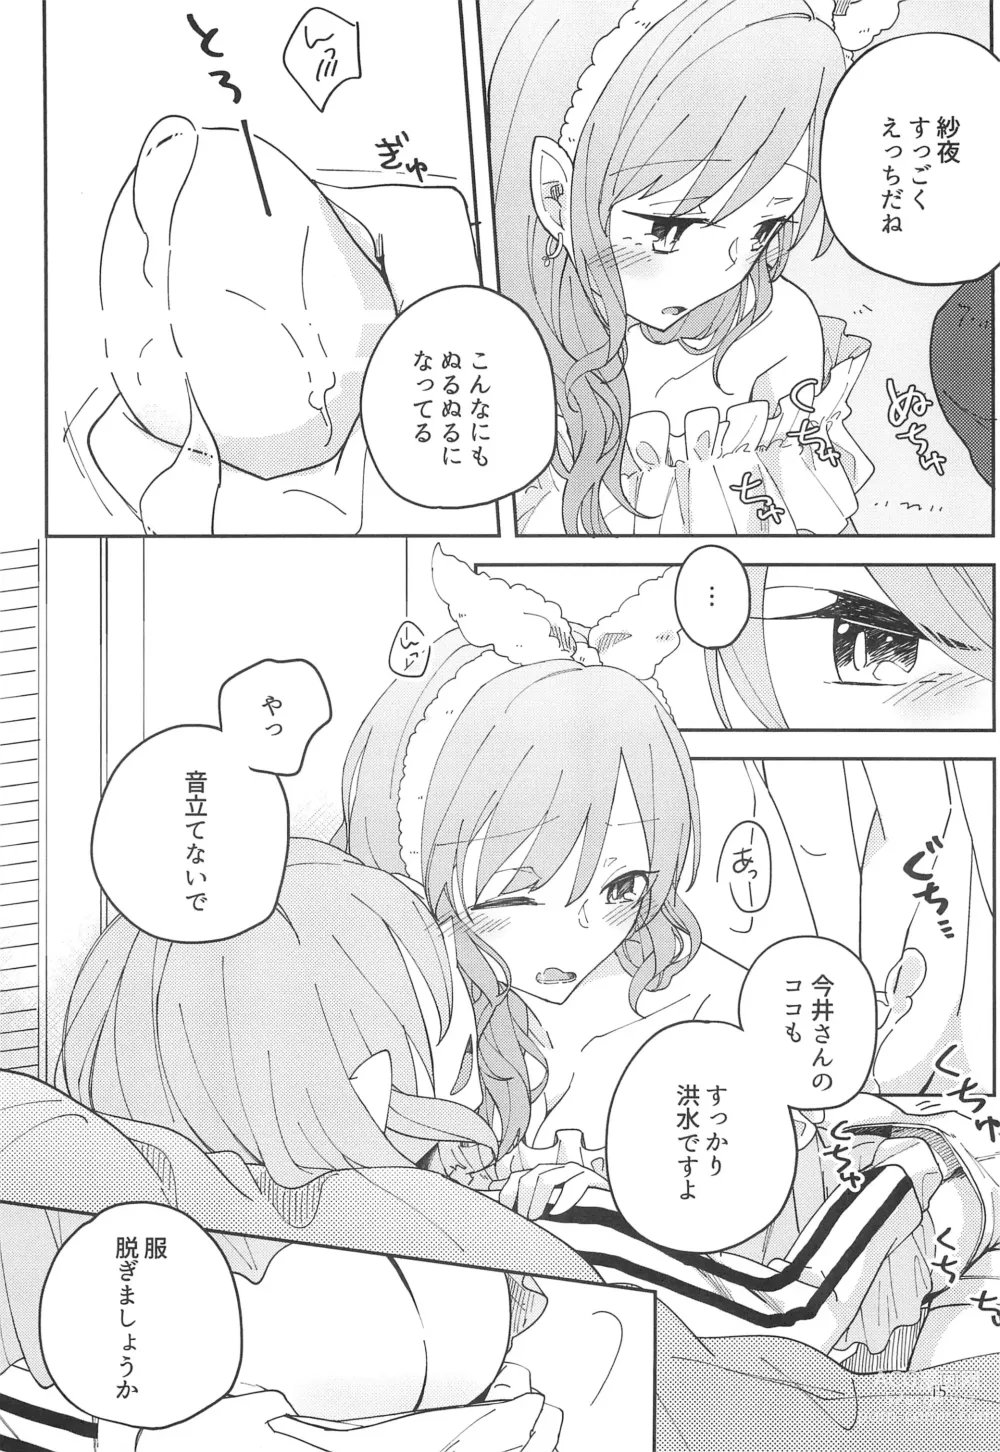 Page 17 of doujinshi I’m crazy about you.